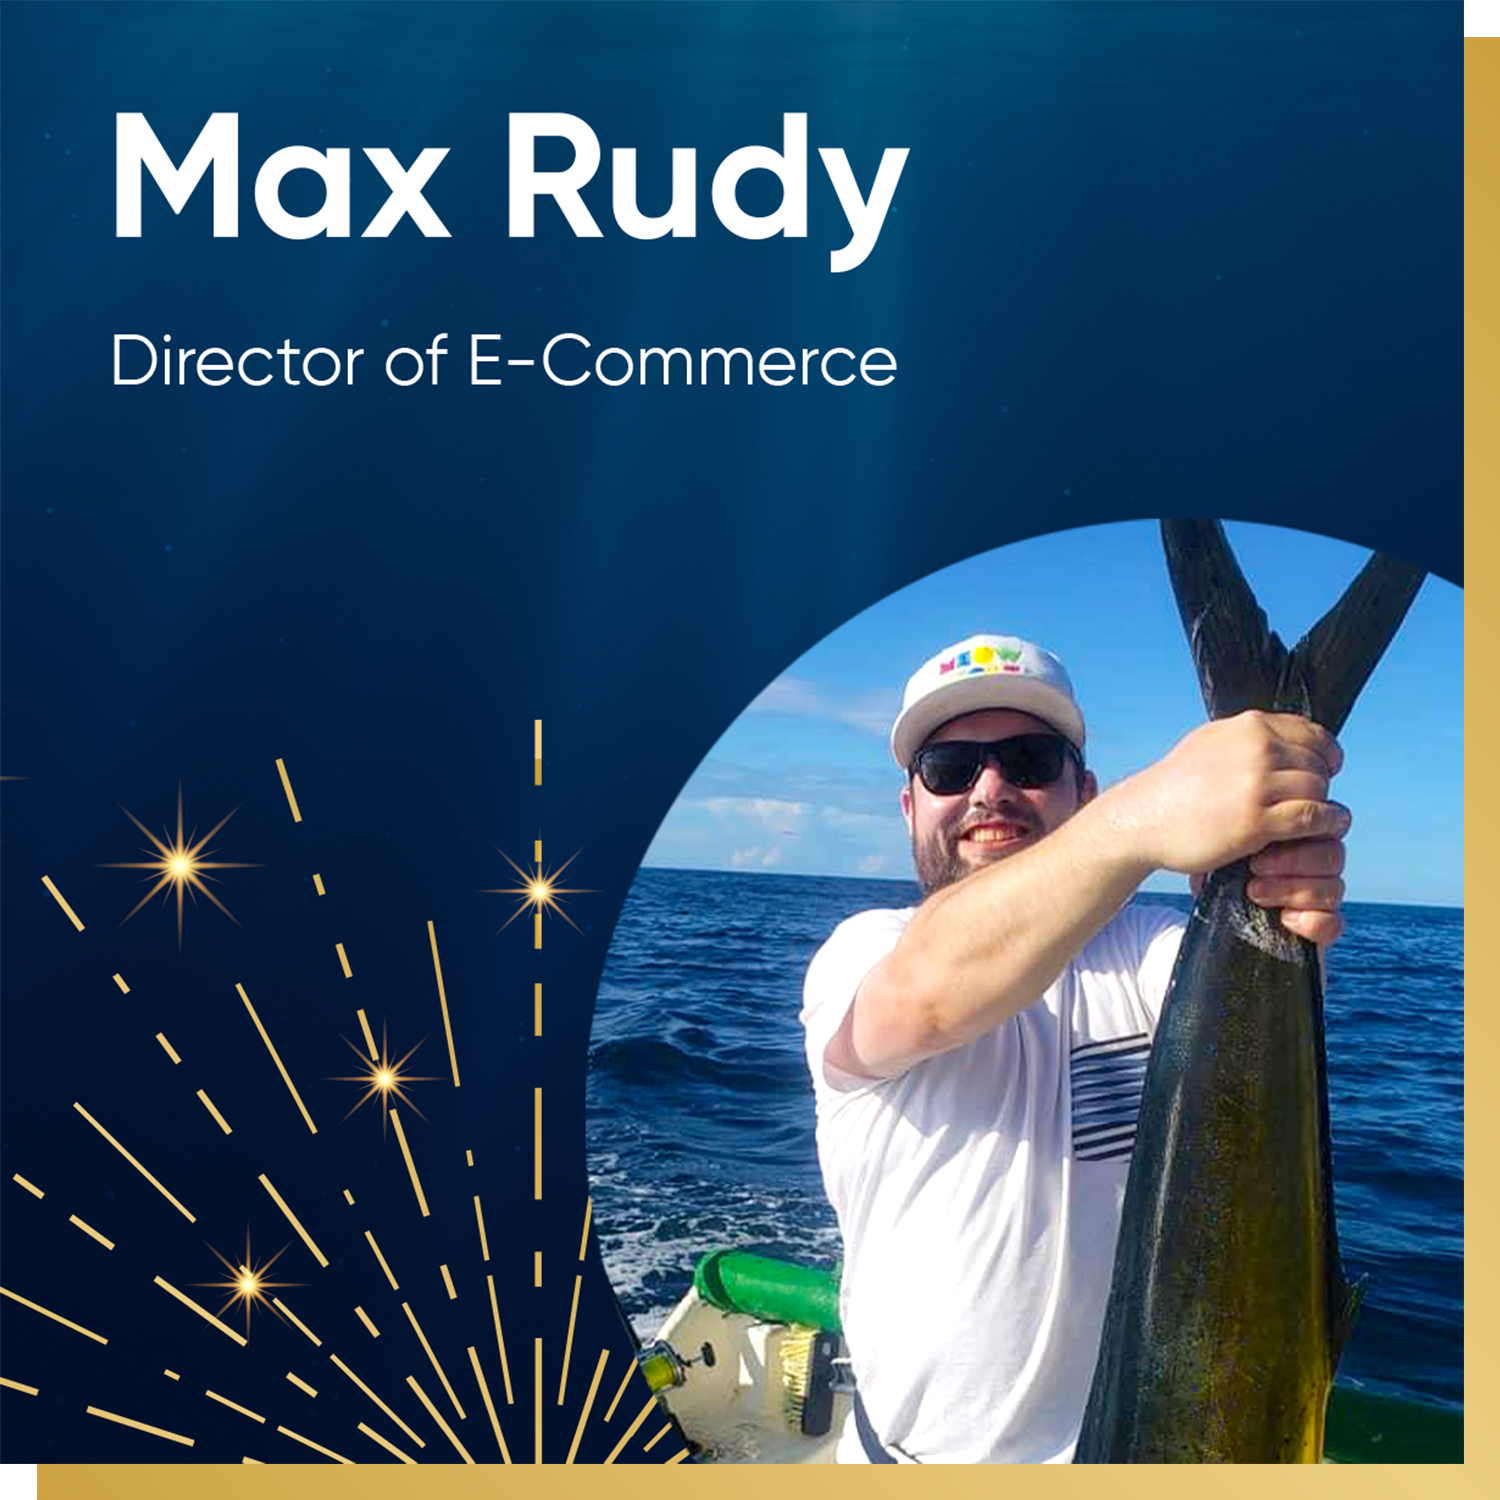 Employee Spotlight - Max Rudy Director of E-Commerce, Wild Planet Foods